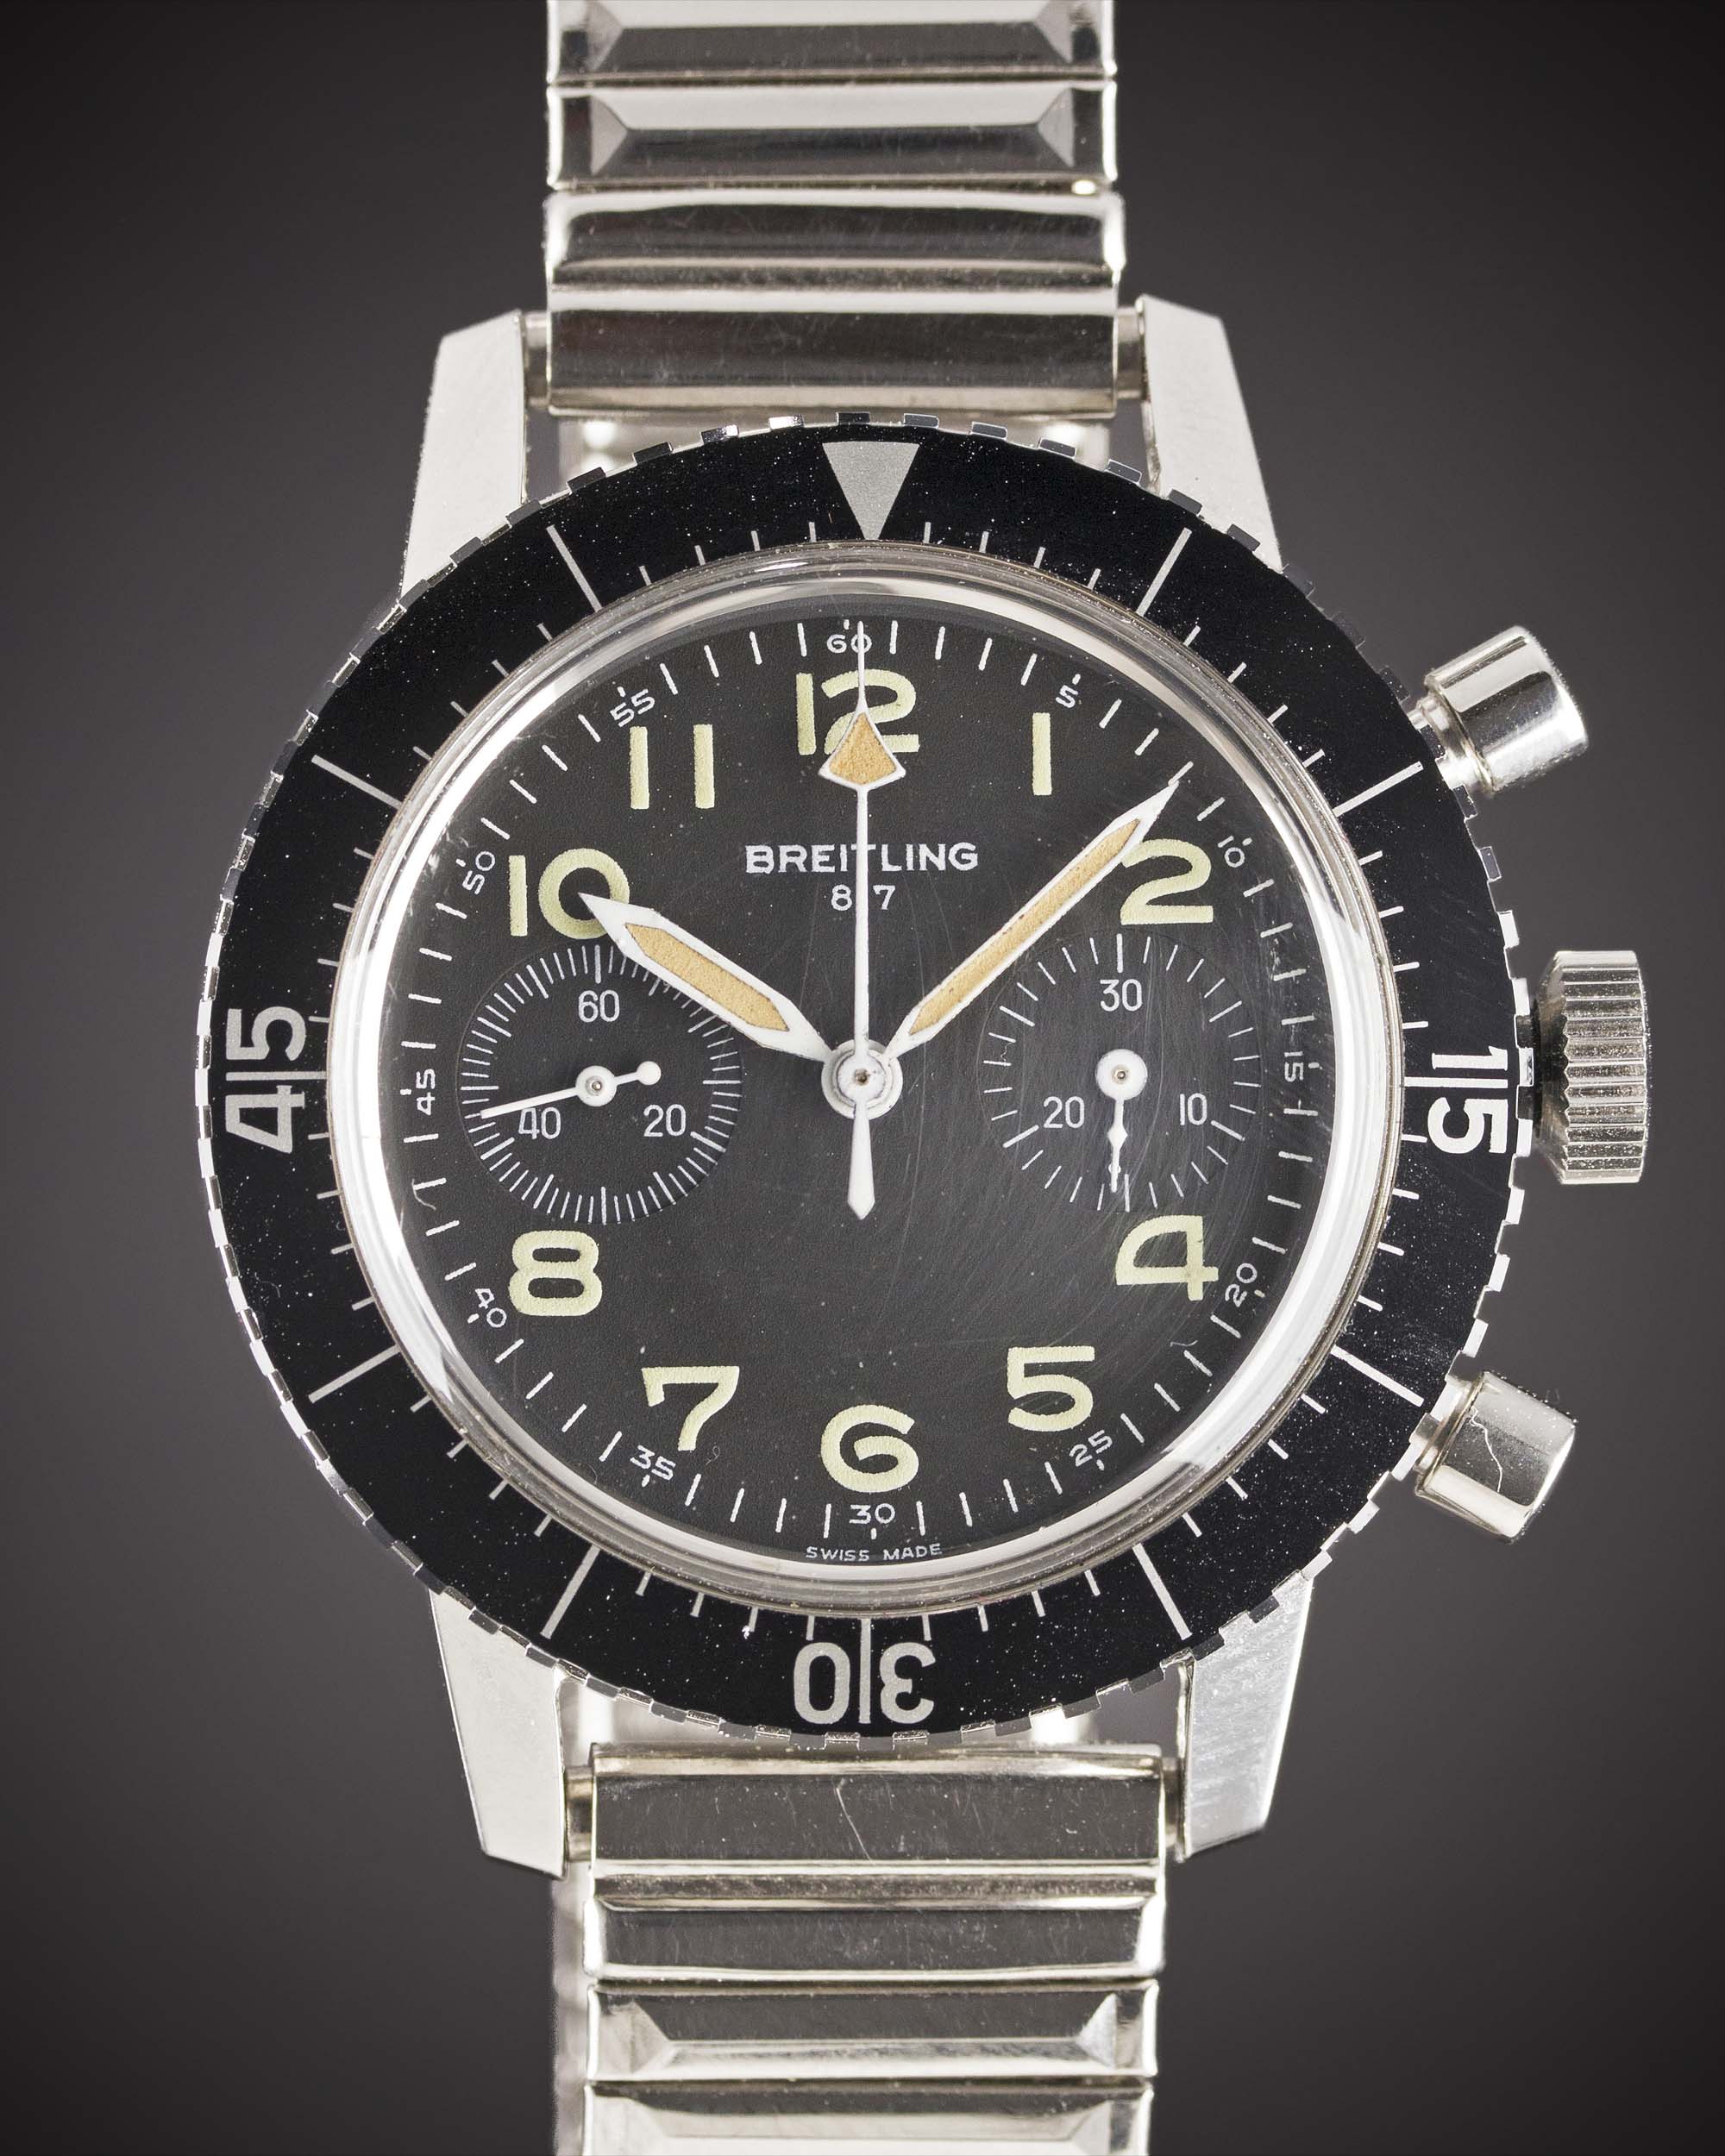 A VERY RARE GENTLEMAN'S STAINLESS STEEL ITALIAN MILITARY "ESERCITO ITALIANO" BREITLING 817 PILOTS - Image 4 of 4